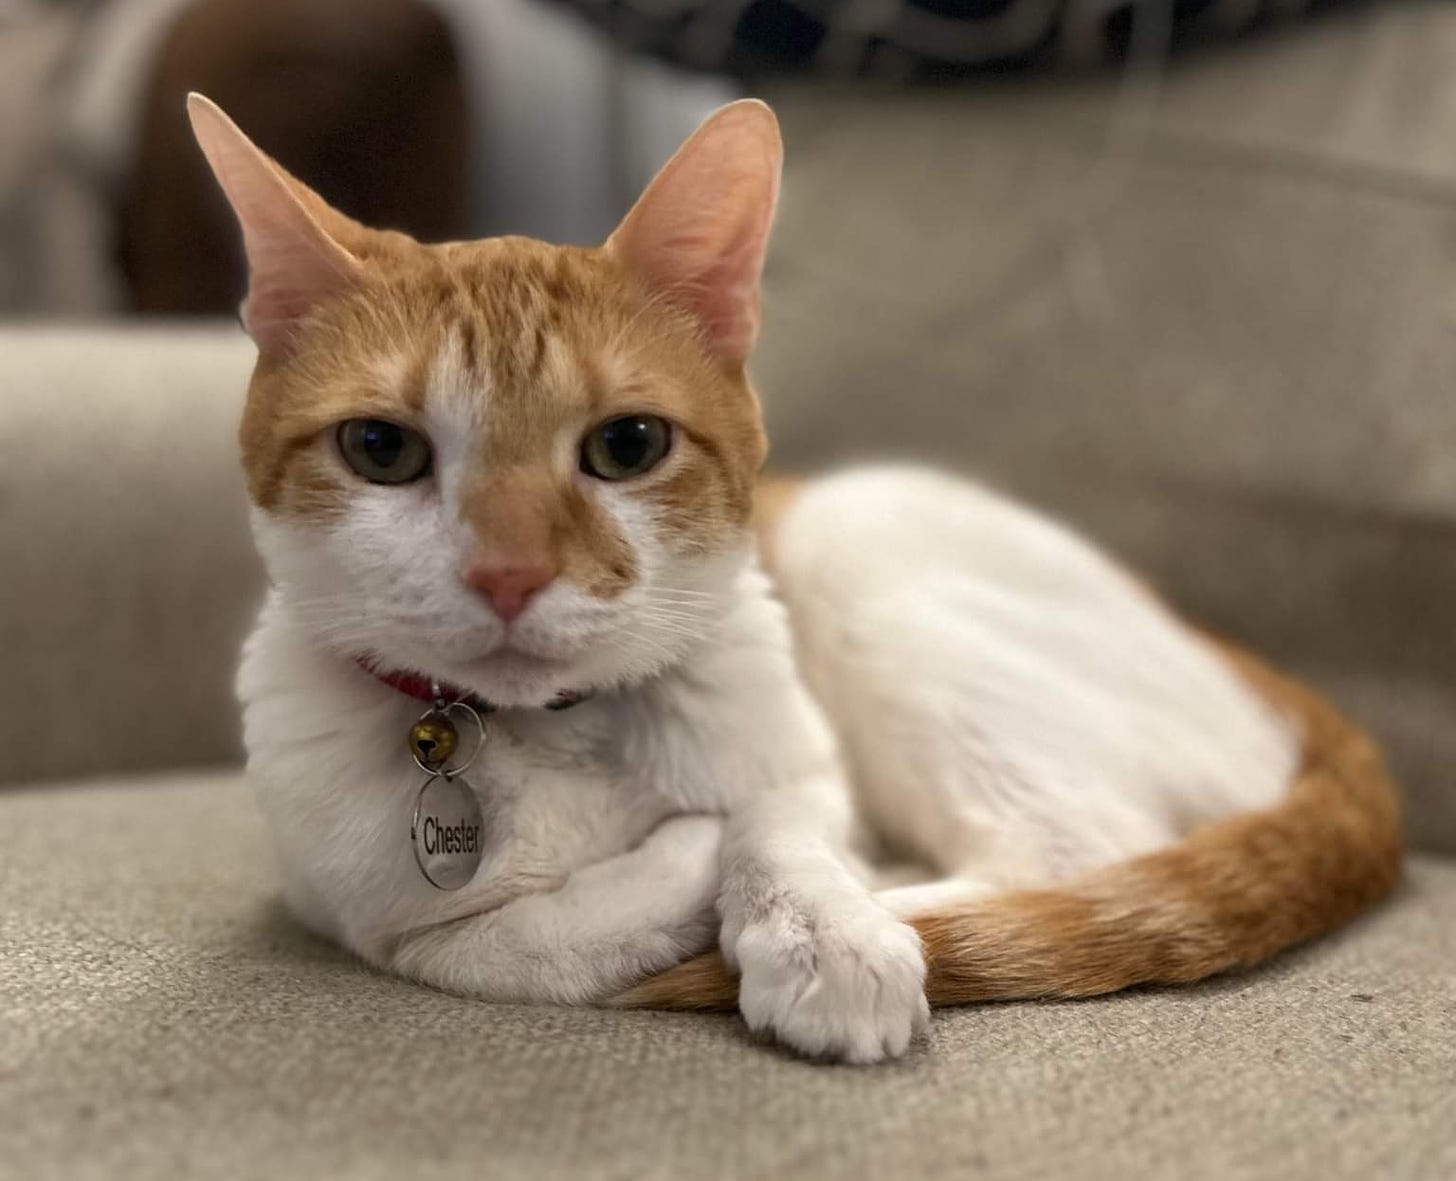 A red and white cat with a collar that says Chester looks at the camera while curled up in a ball